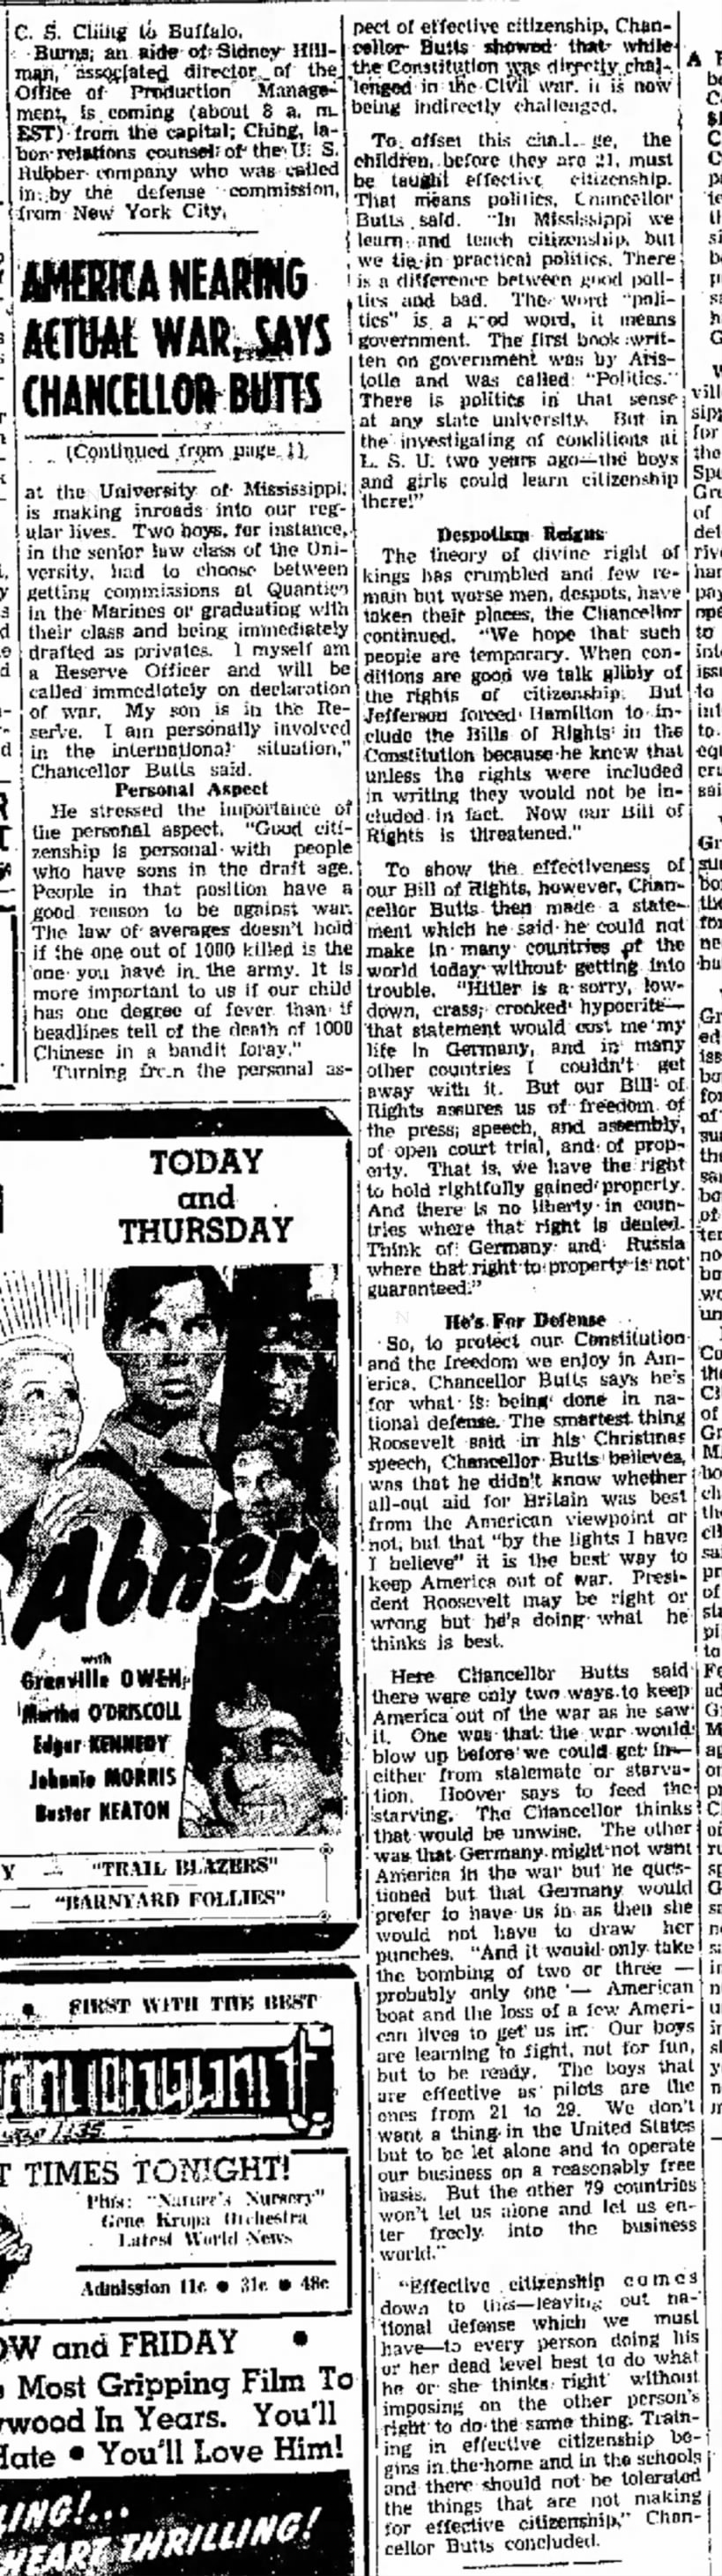 A. Benjamin Butts article 2
The Delta Democrat-Times
Greenville, MS 26 February 1941